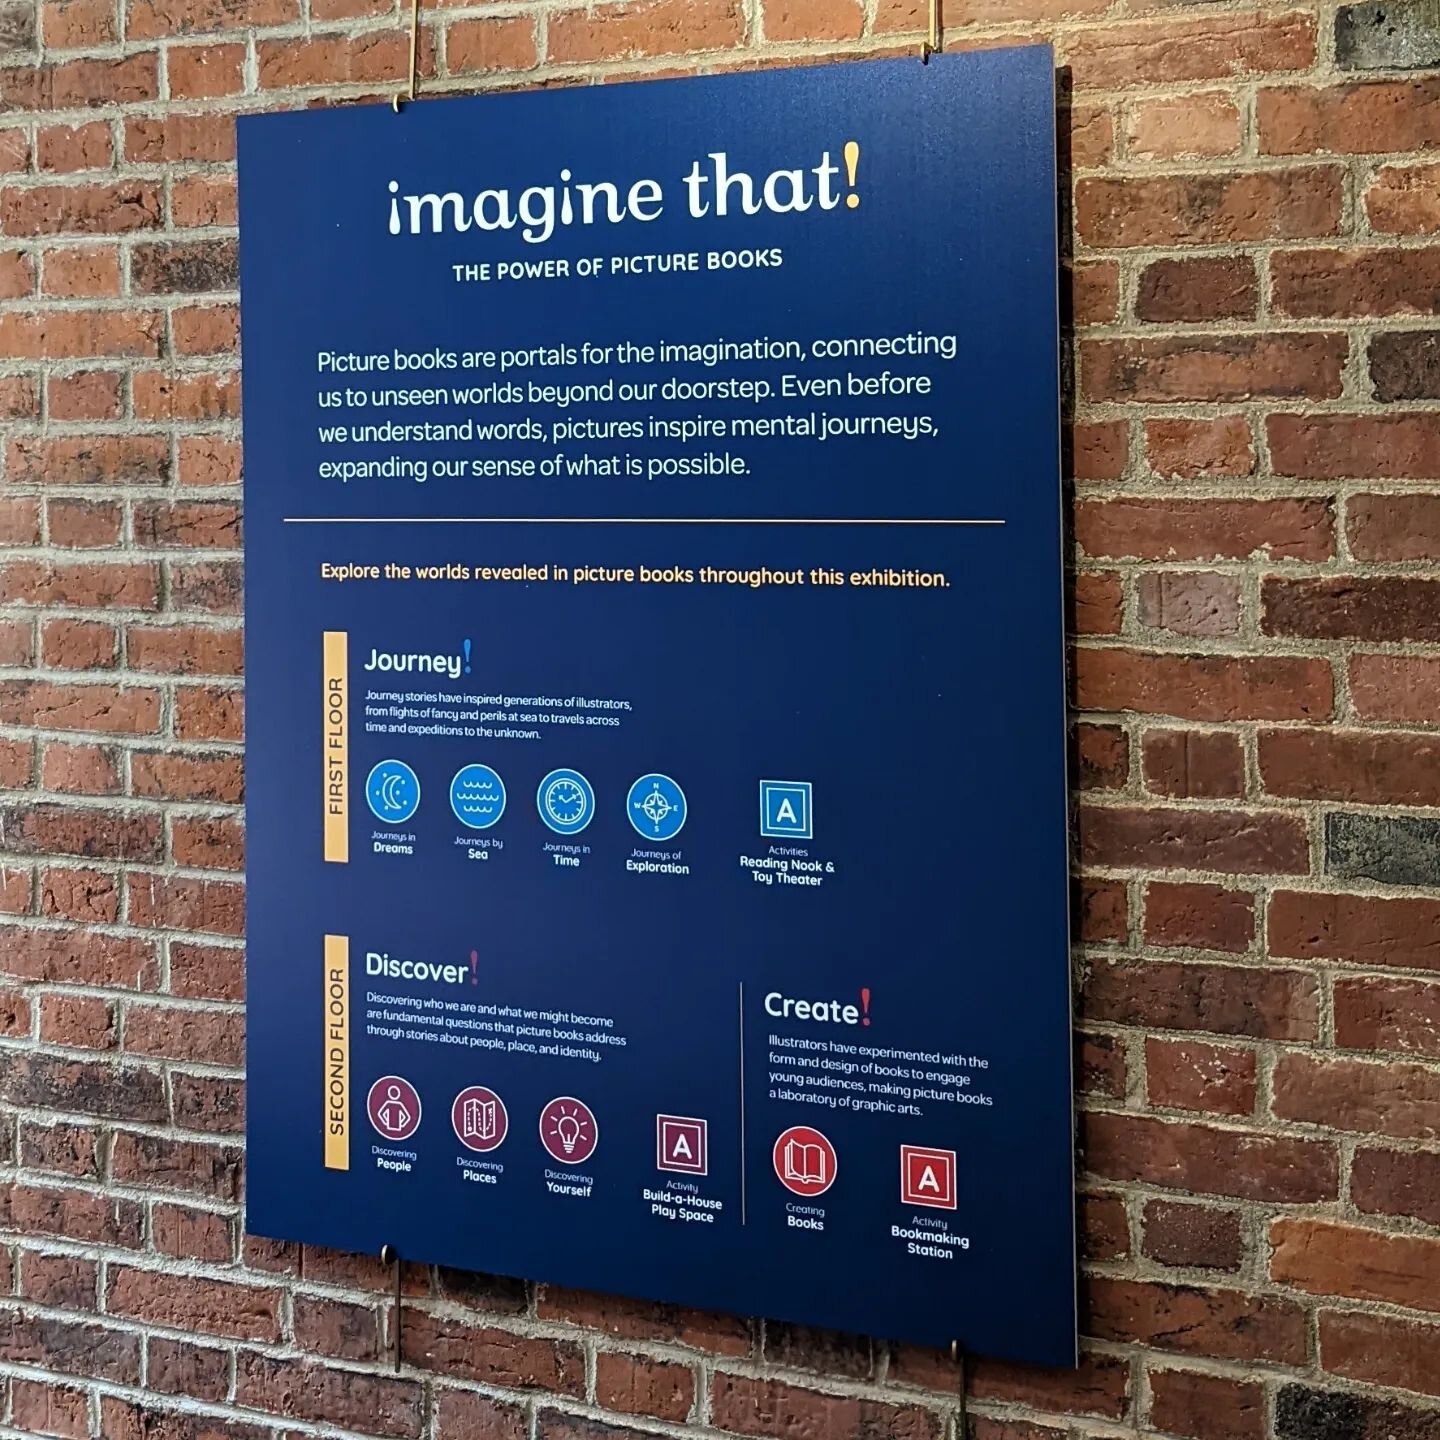 Creating a consistent content hierarchy throughout an exhibition is one of our favorite parts of the exhibit design process. For Imagine That! The Power of Picture Books we use four primary label groupings throughout the exhibition:
▪ orientation pan